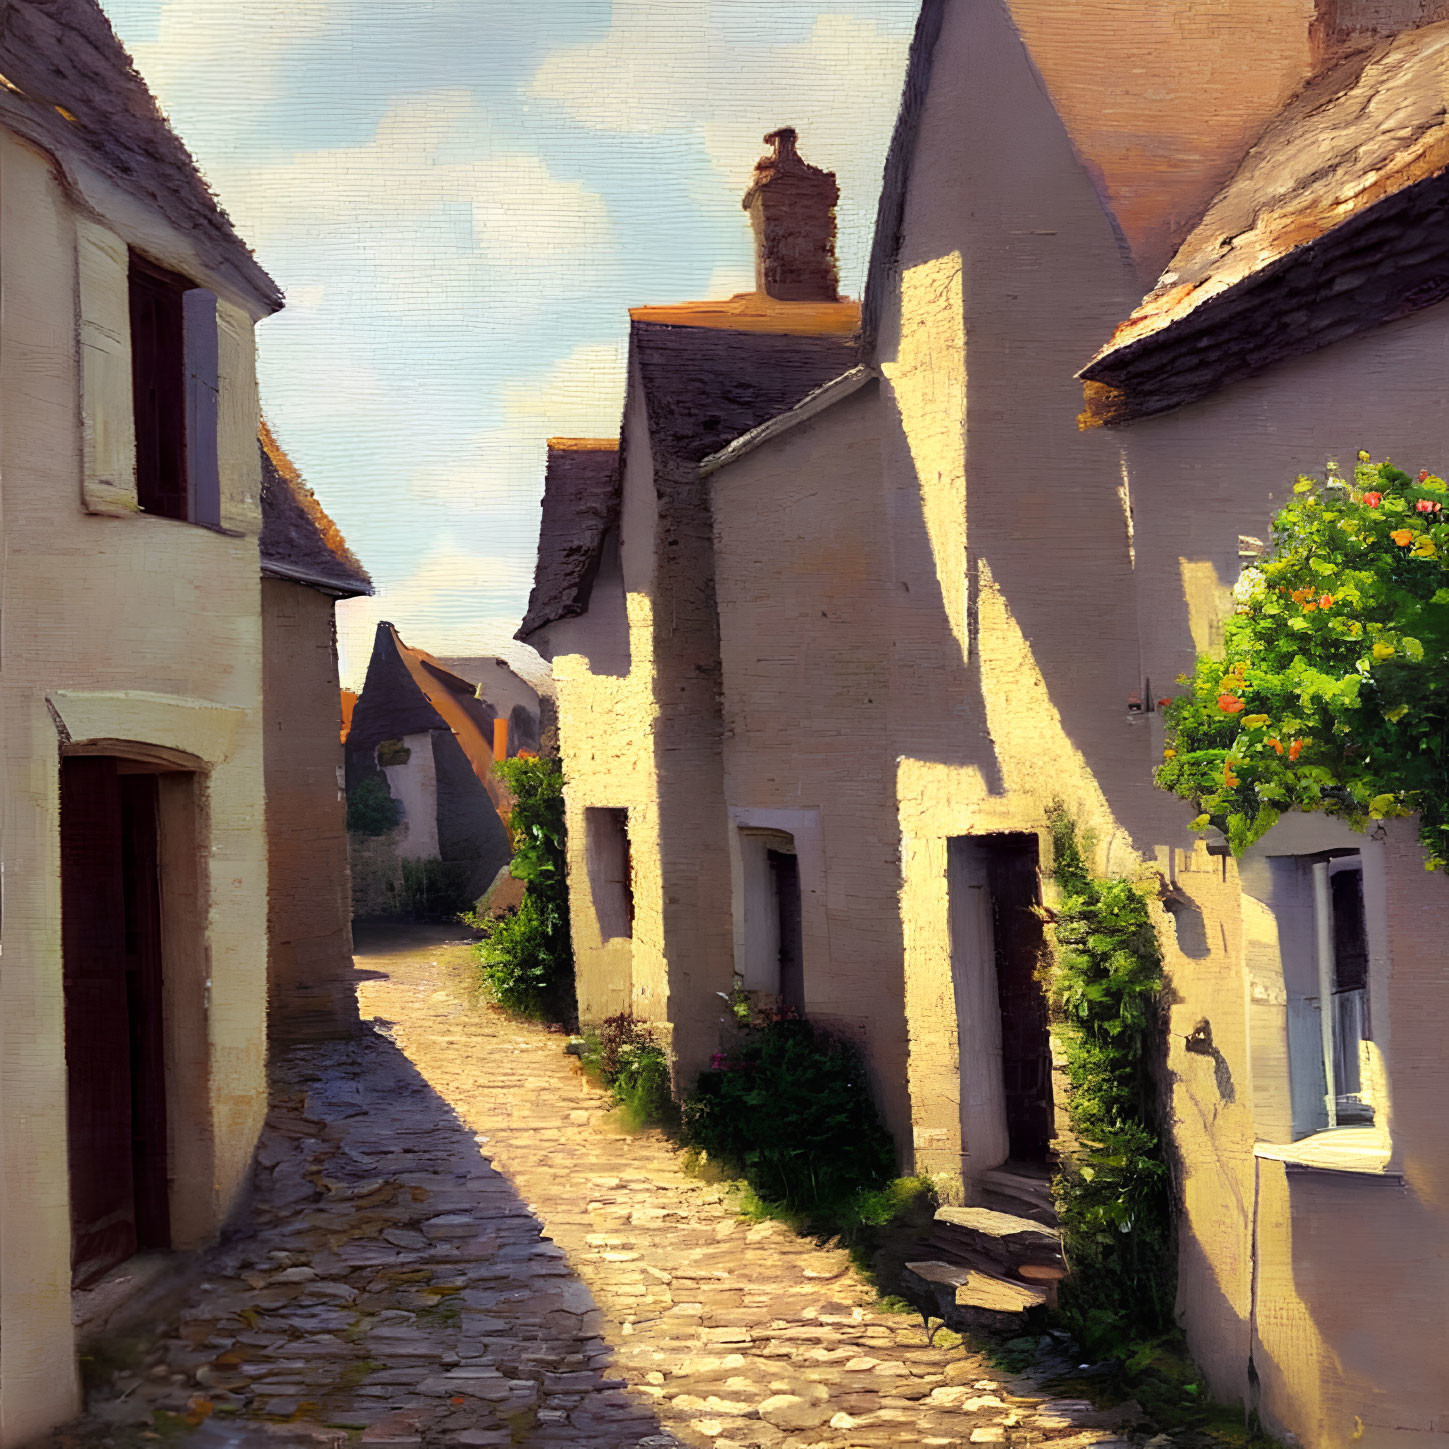 Traditional houses on sunlit cobblestone street with lush greenery